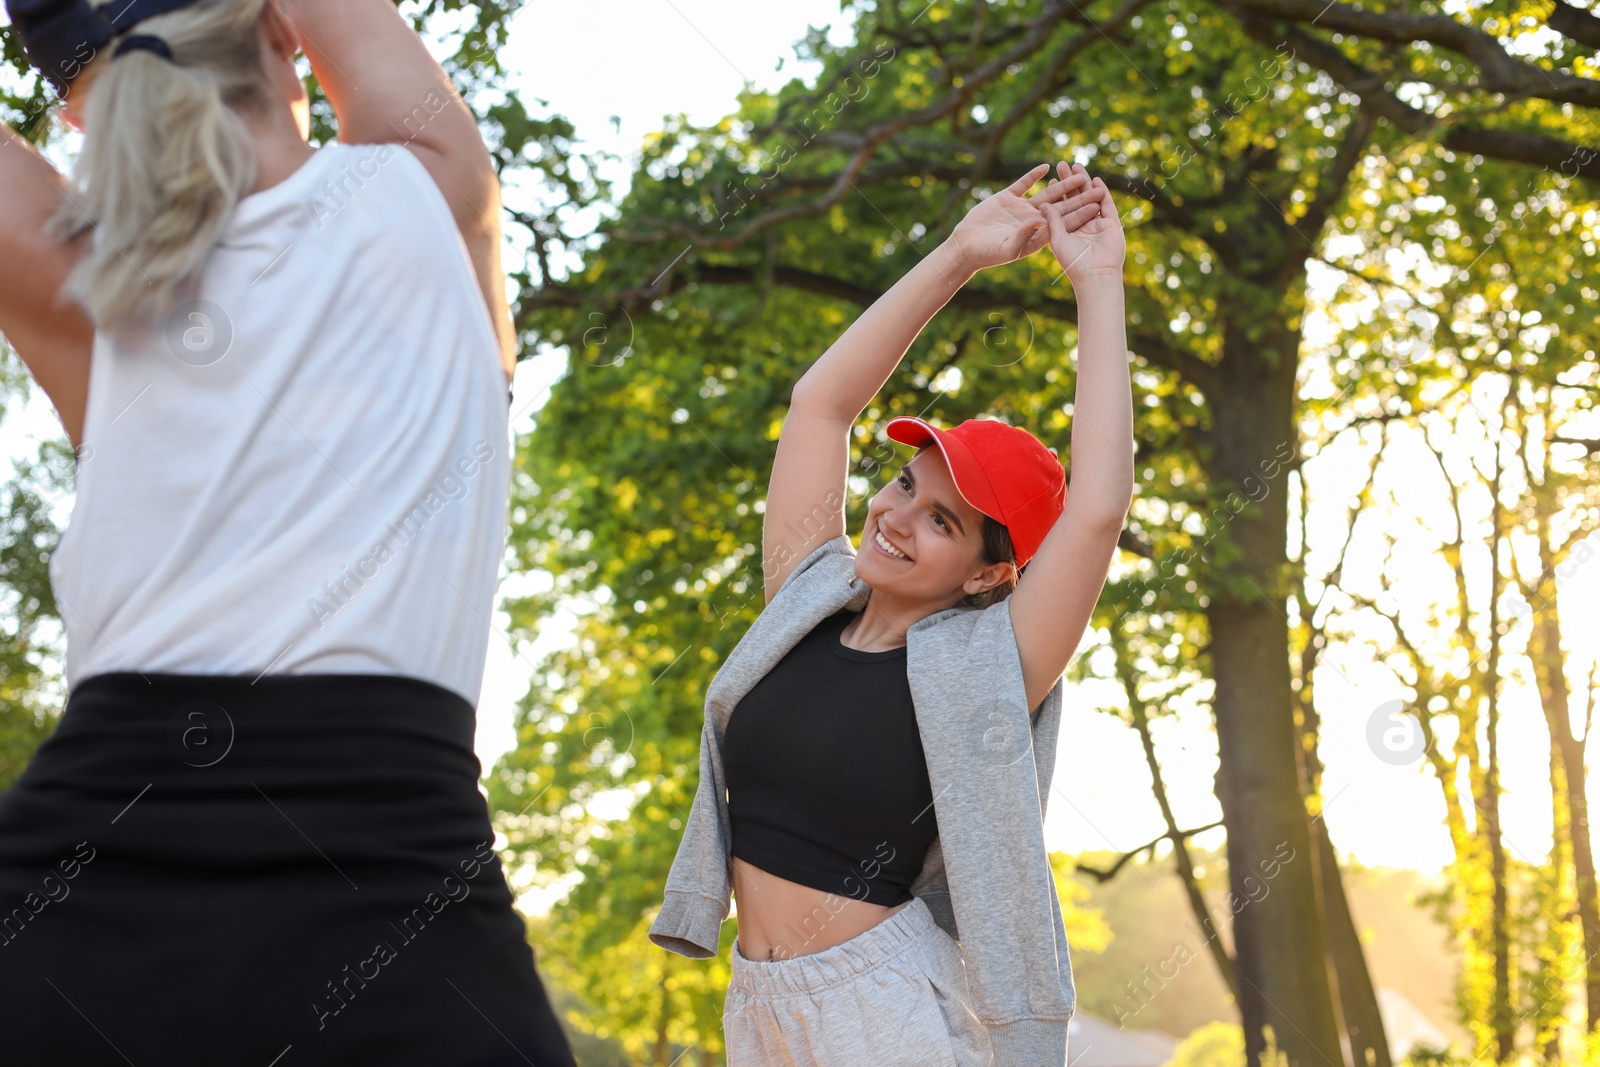 Photo of Women doing morning exercise in park on sunny day